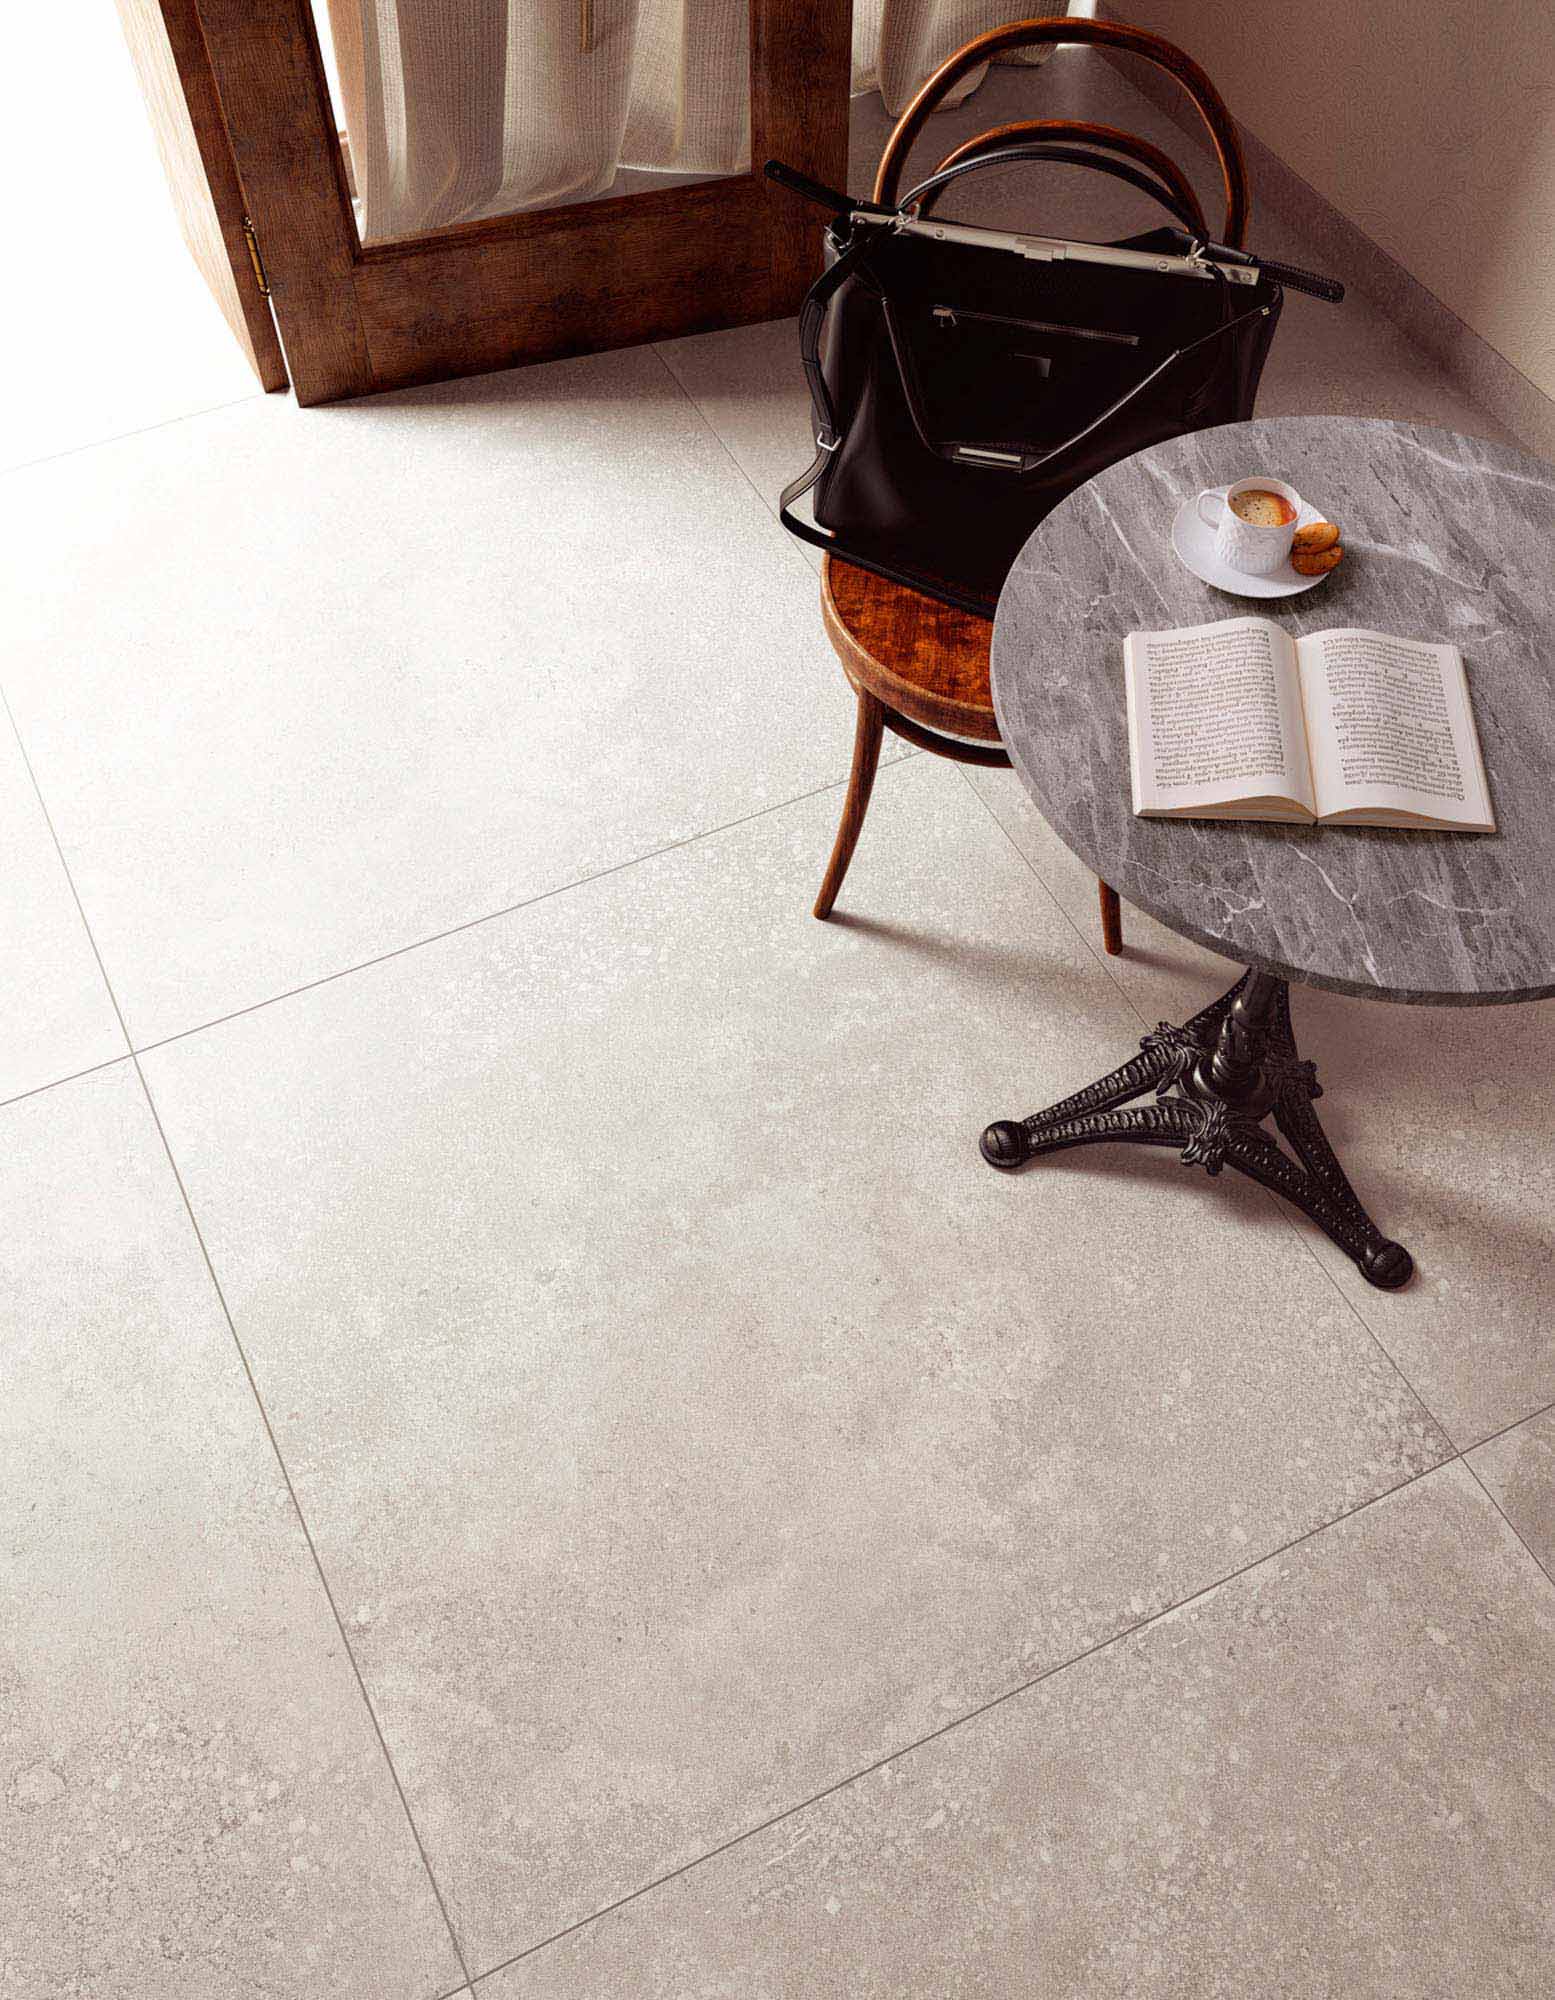 Do you want more information about tiles and floors?